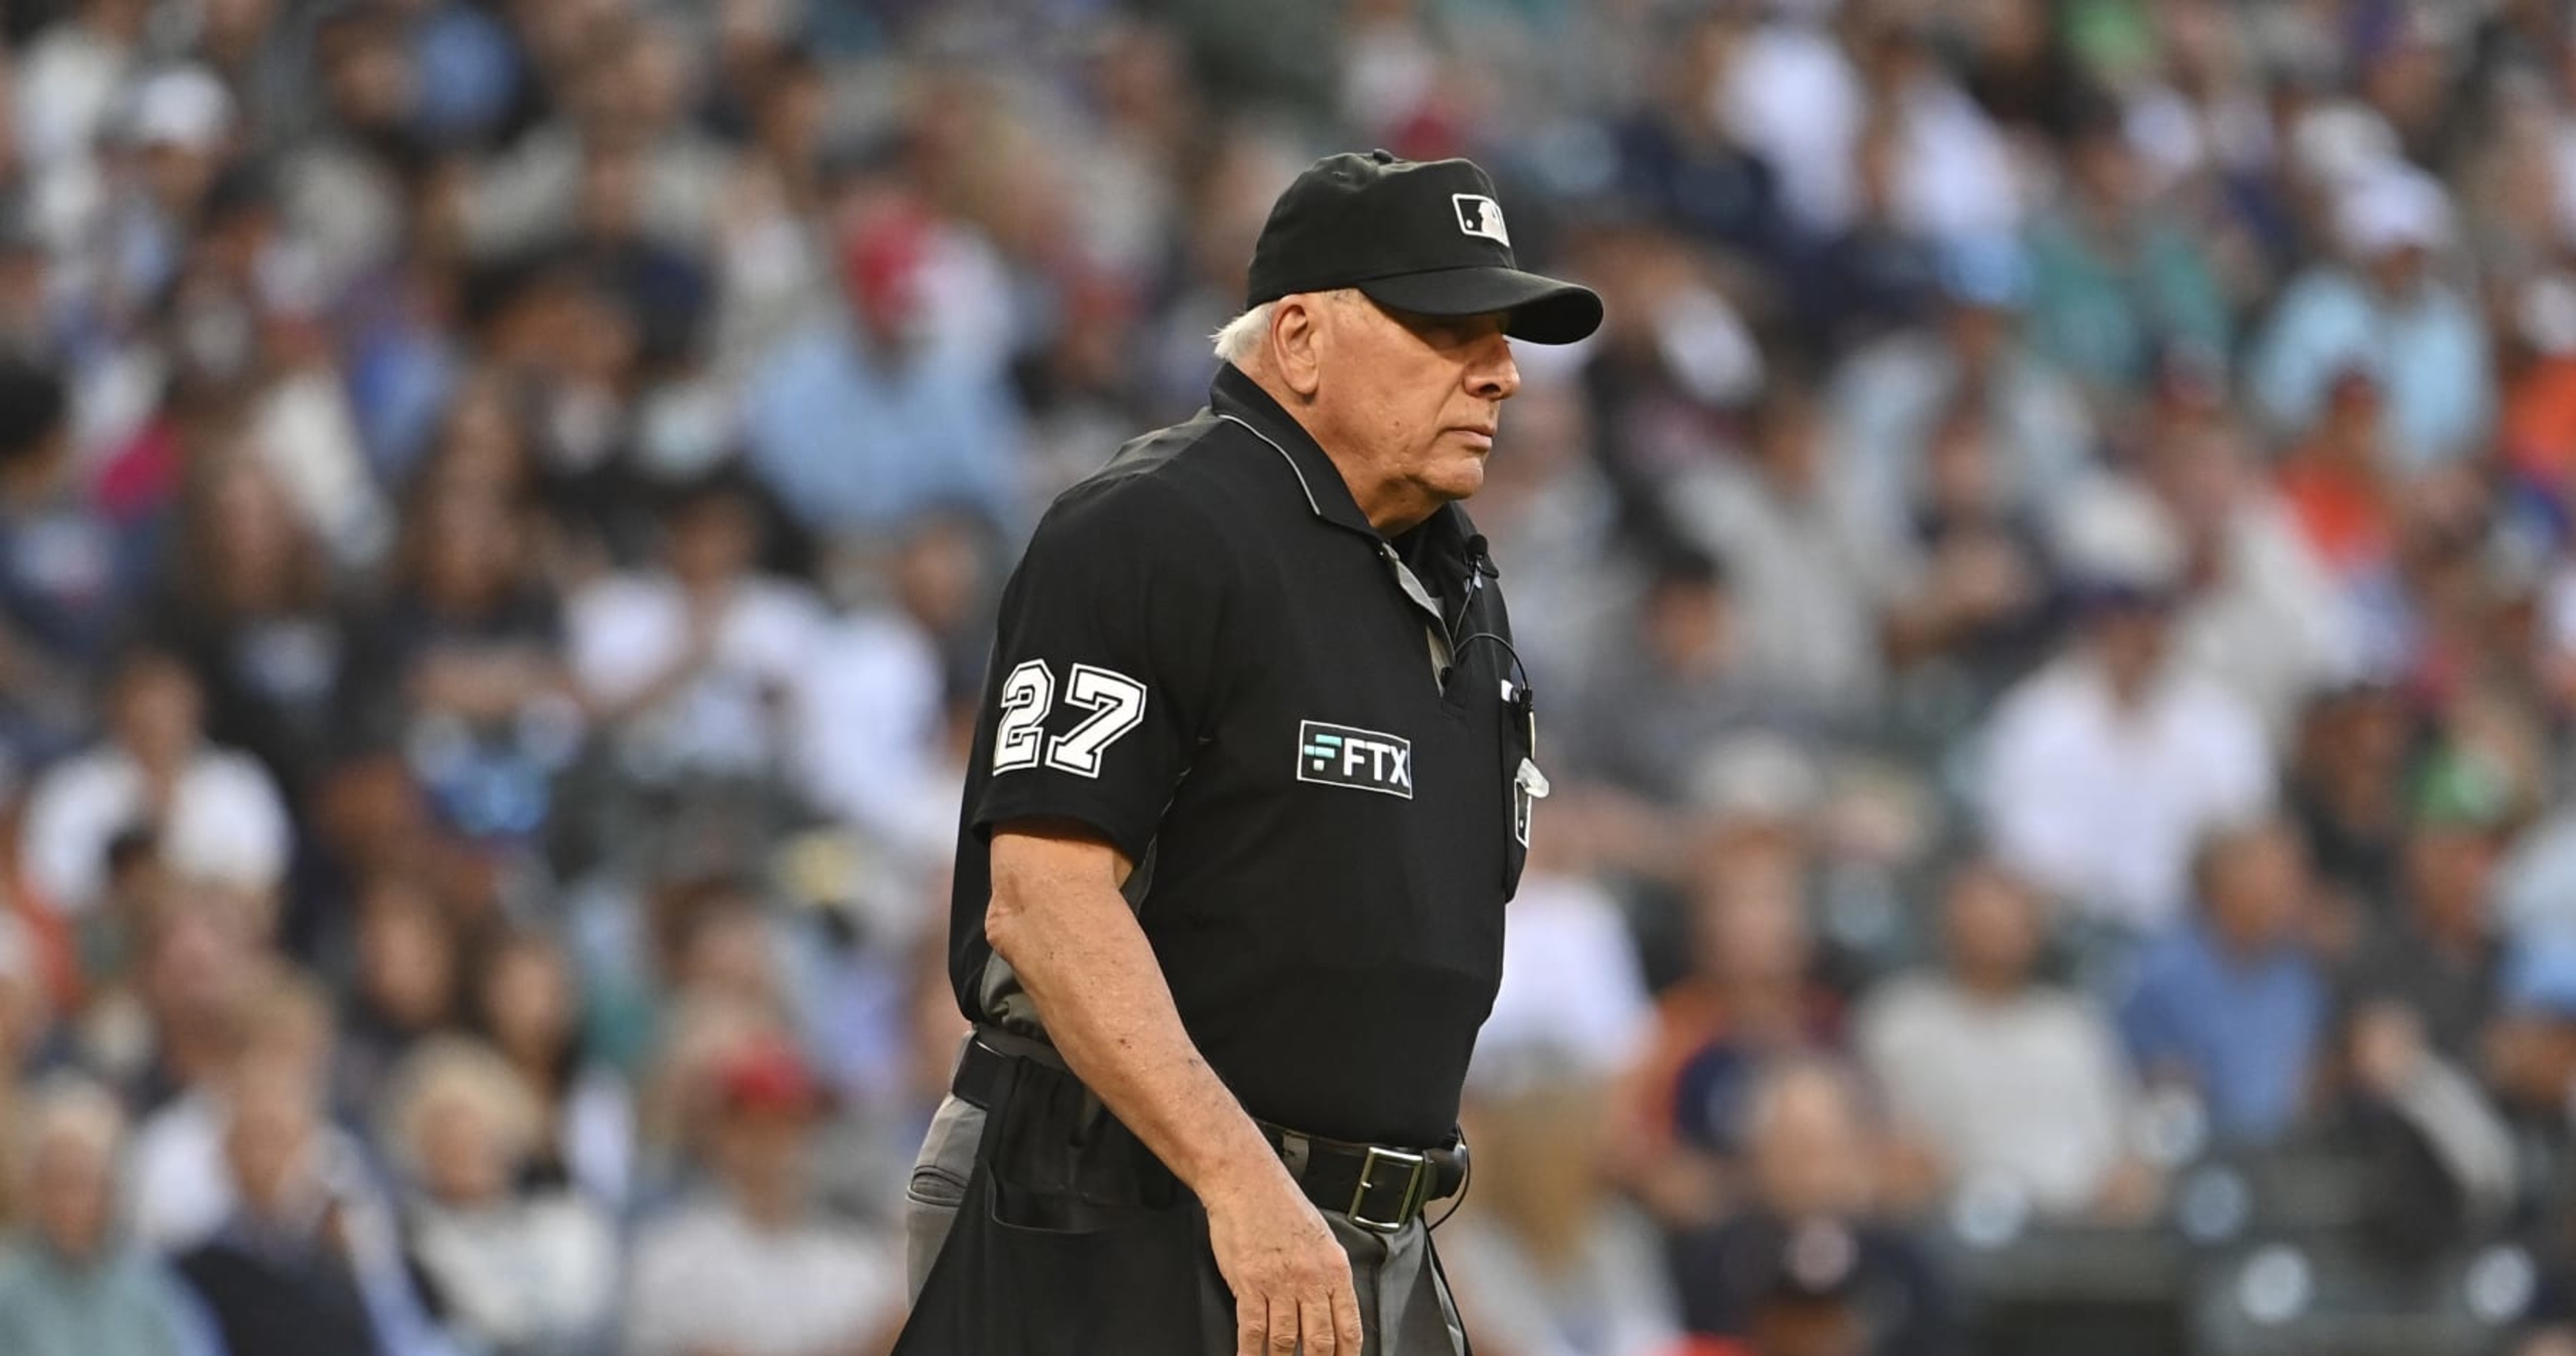 67-Year-Old Umpire Hospitalized After Being Hit in Head